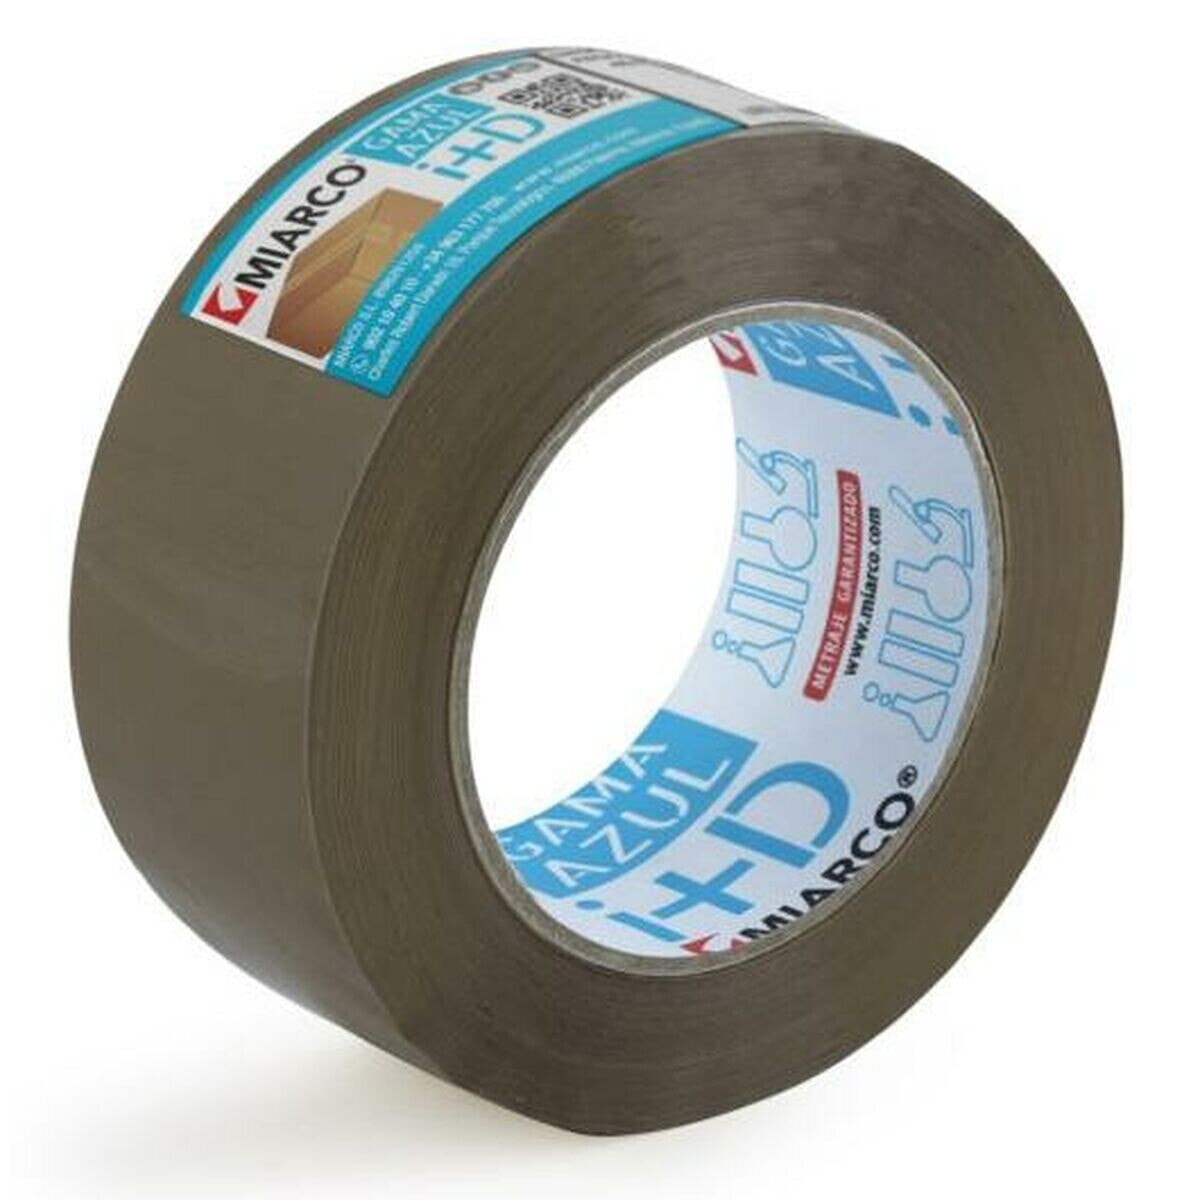 Adhesive Tape MIARCO Brown Multicolour 48 x 66 mm (6 Pieces)